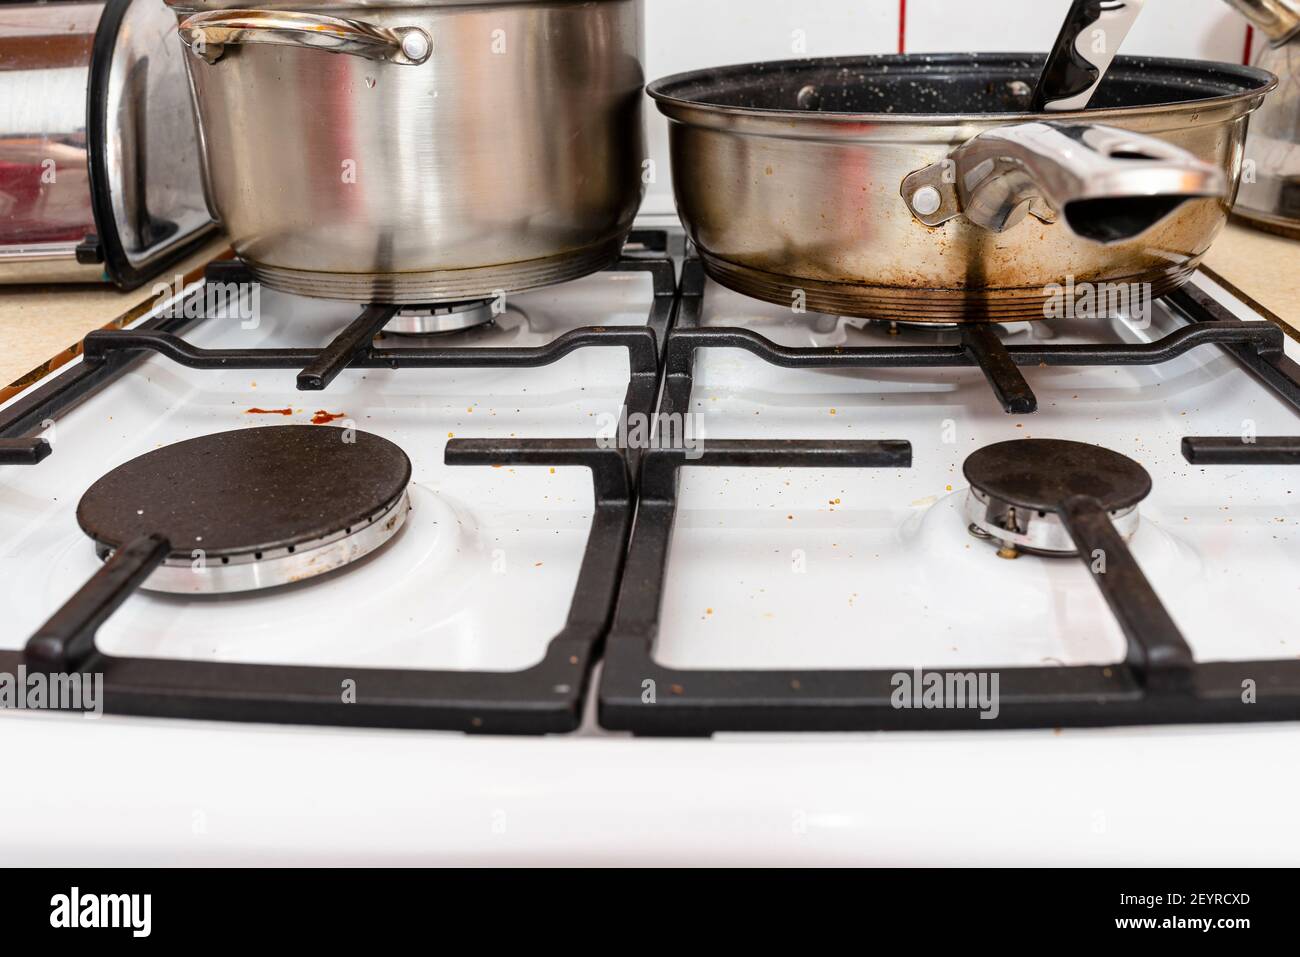 A stainless steel pot and frying pan standing on a switched off gas stove in the kitchen. Stock Photo